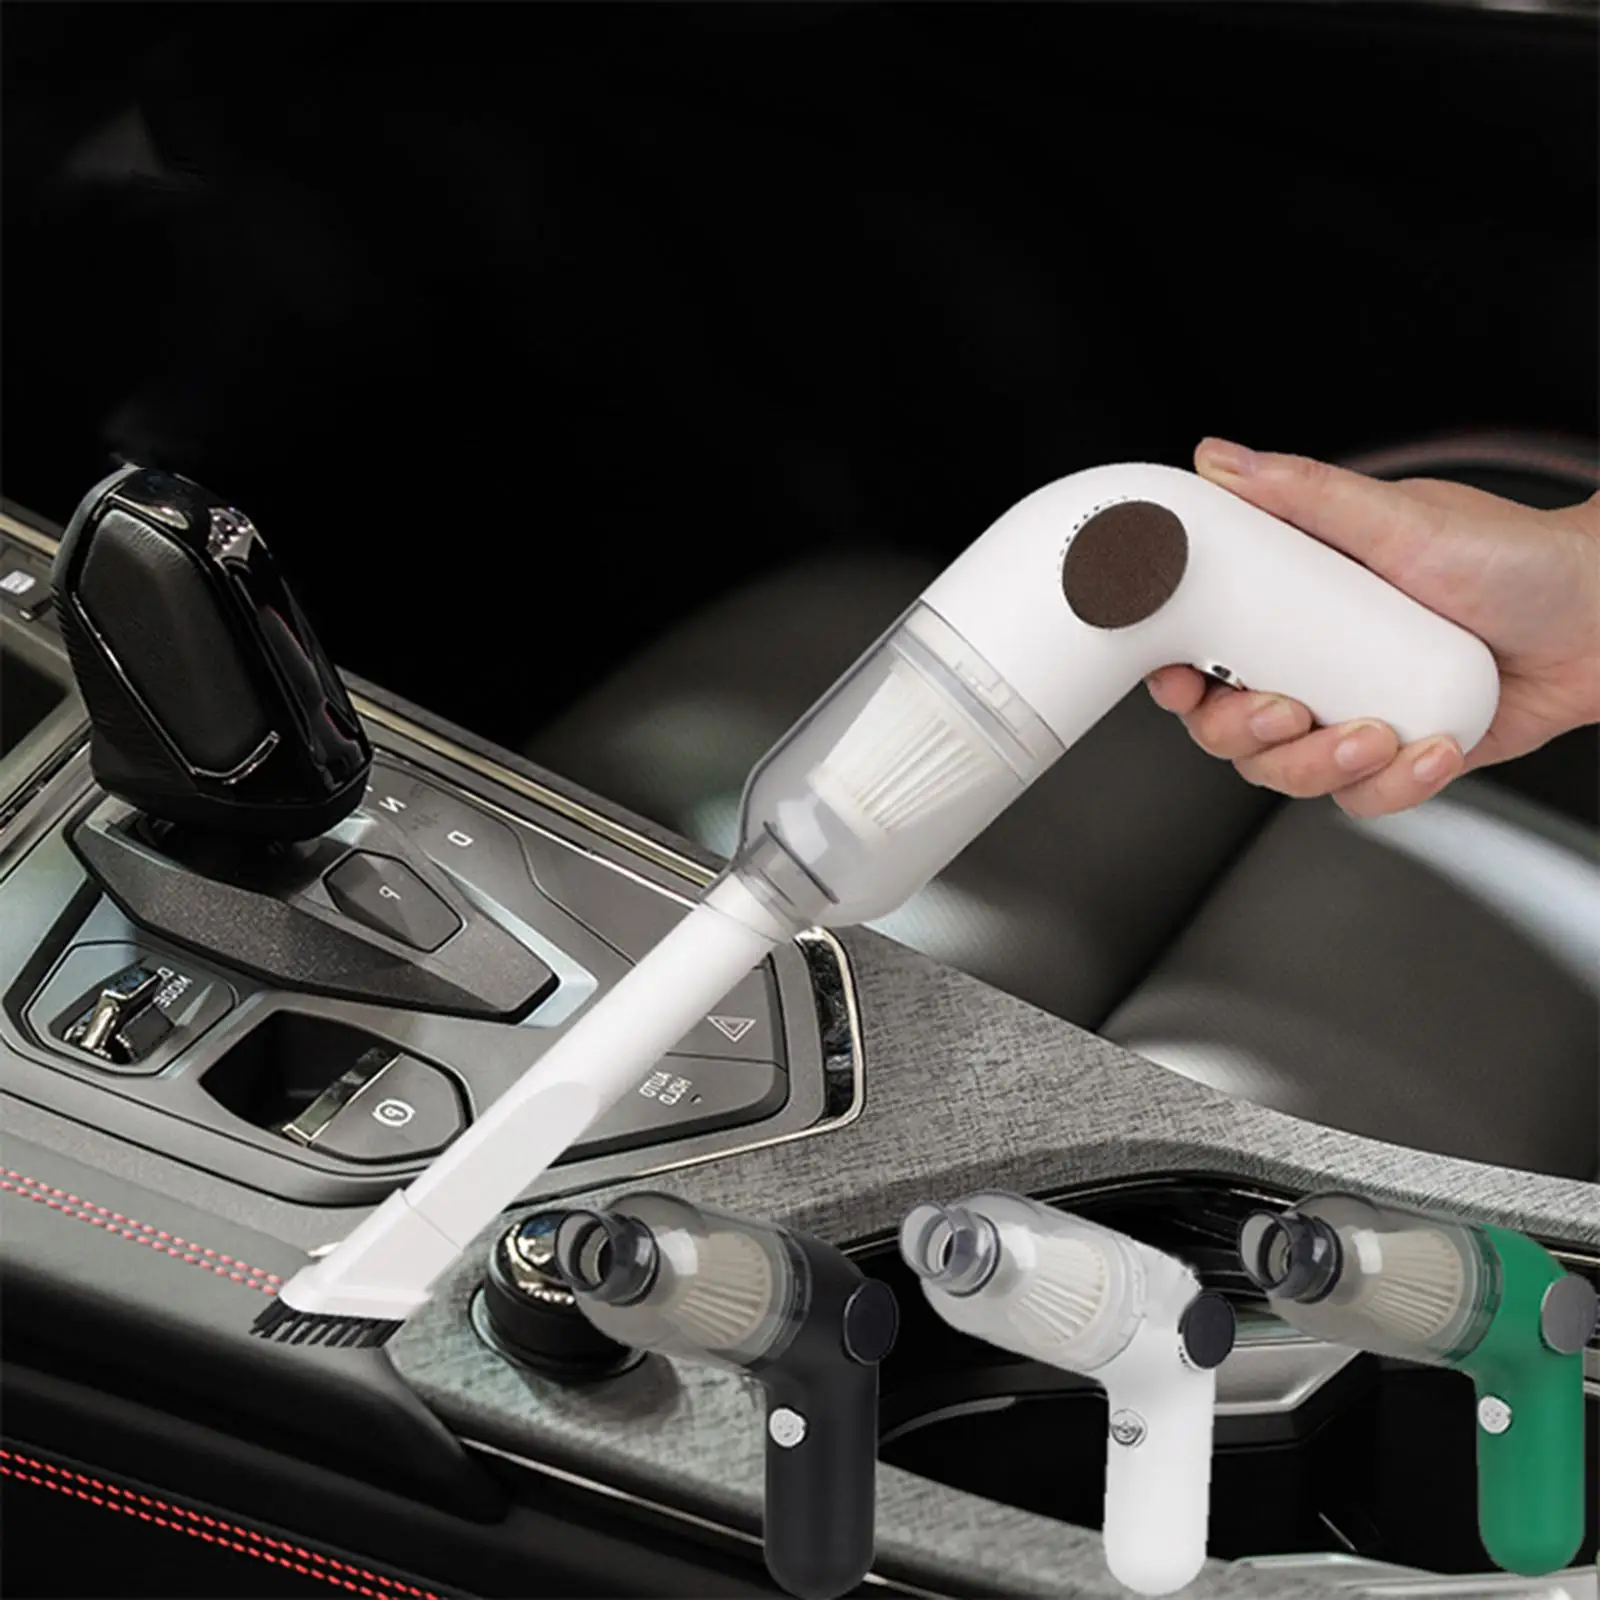 Car Vacuum Cleaner 6000PA Wireless Wet and Dry Auto Accessories Portable Powerful Suction Handheld Vacuums for Car Cleaning